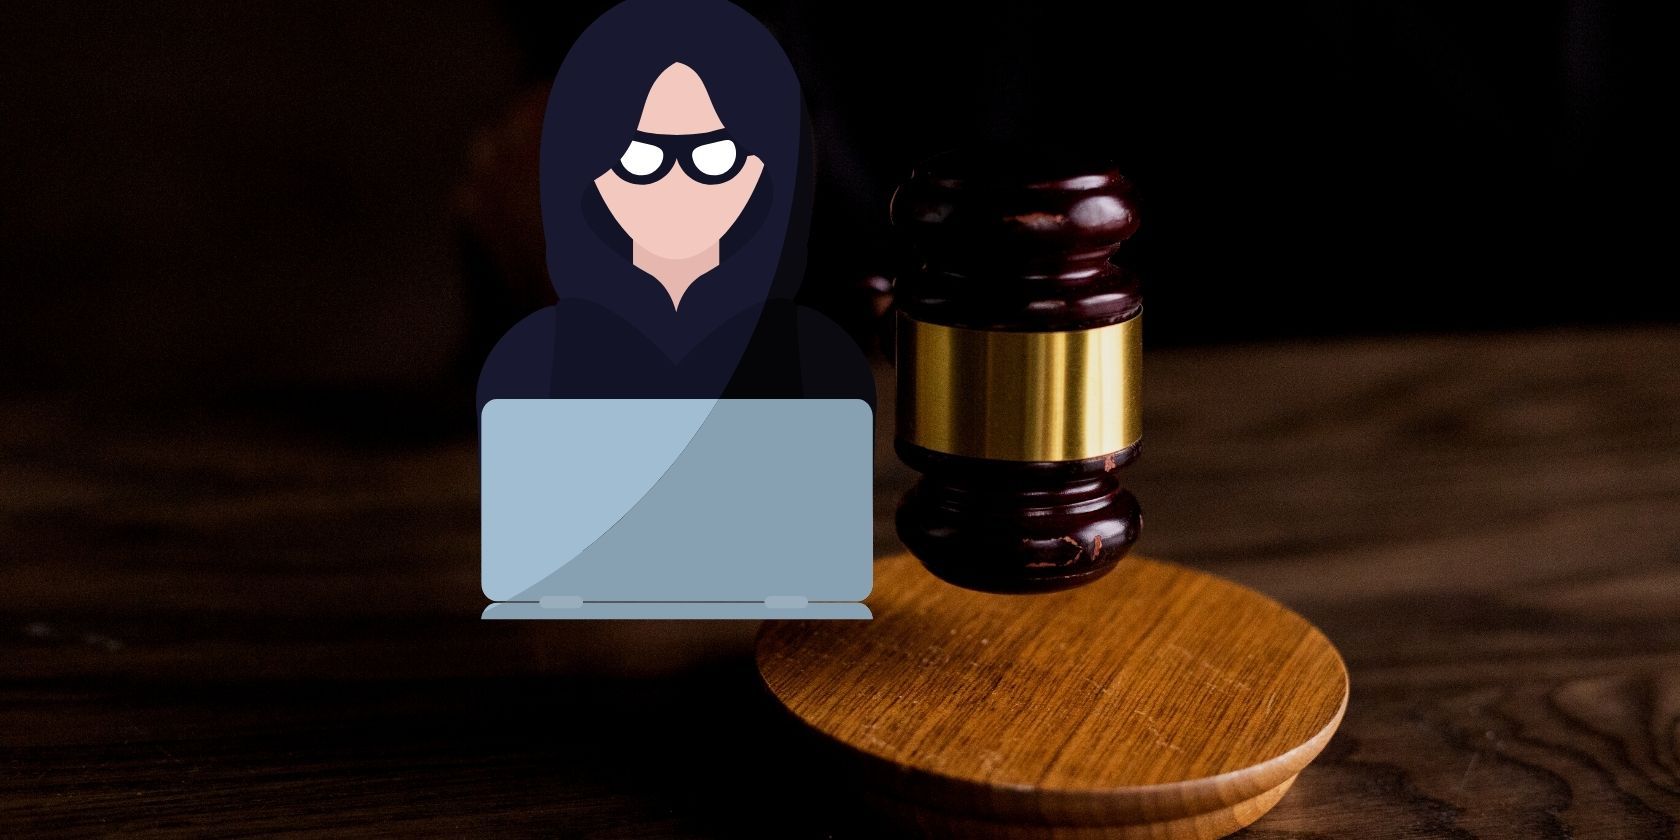 Graphic illustration of a hacker juxtaposed against a gavel